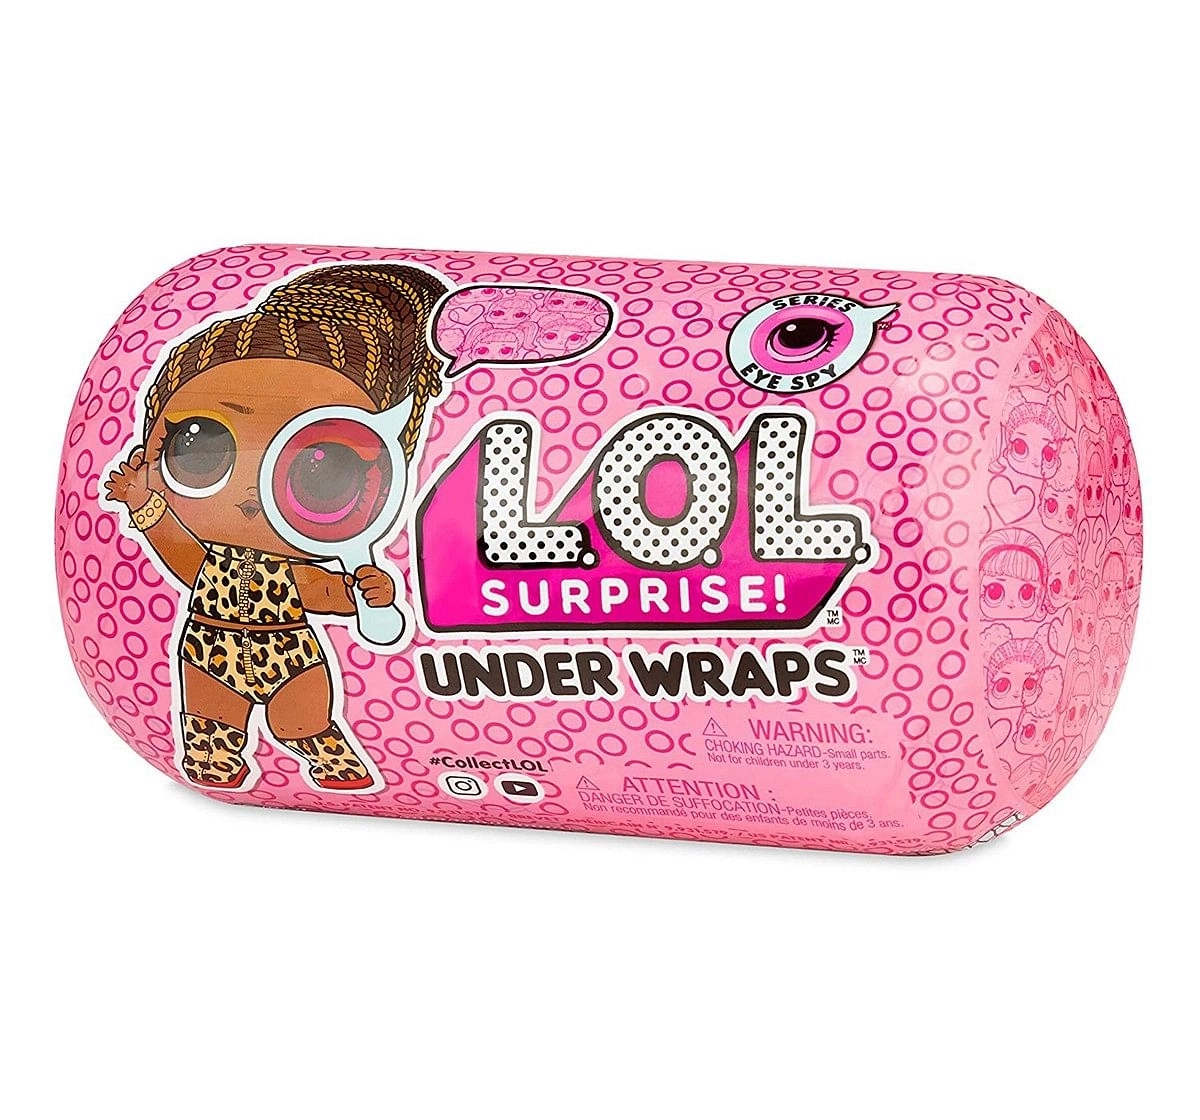  L.O.L. Surprise Under Wraps Doll Series Eye Spy 1A Collectible Dolls for age 5Y+ 